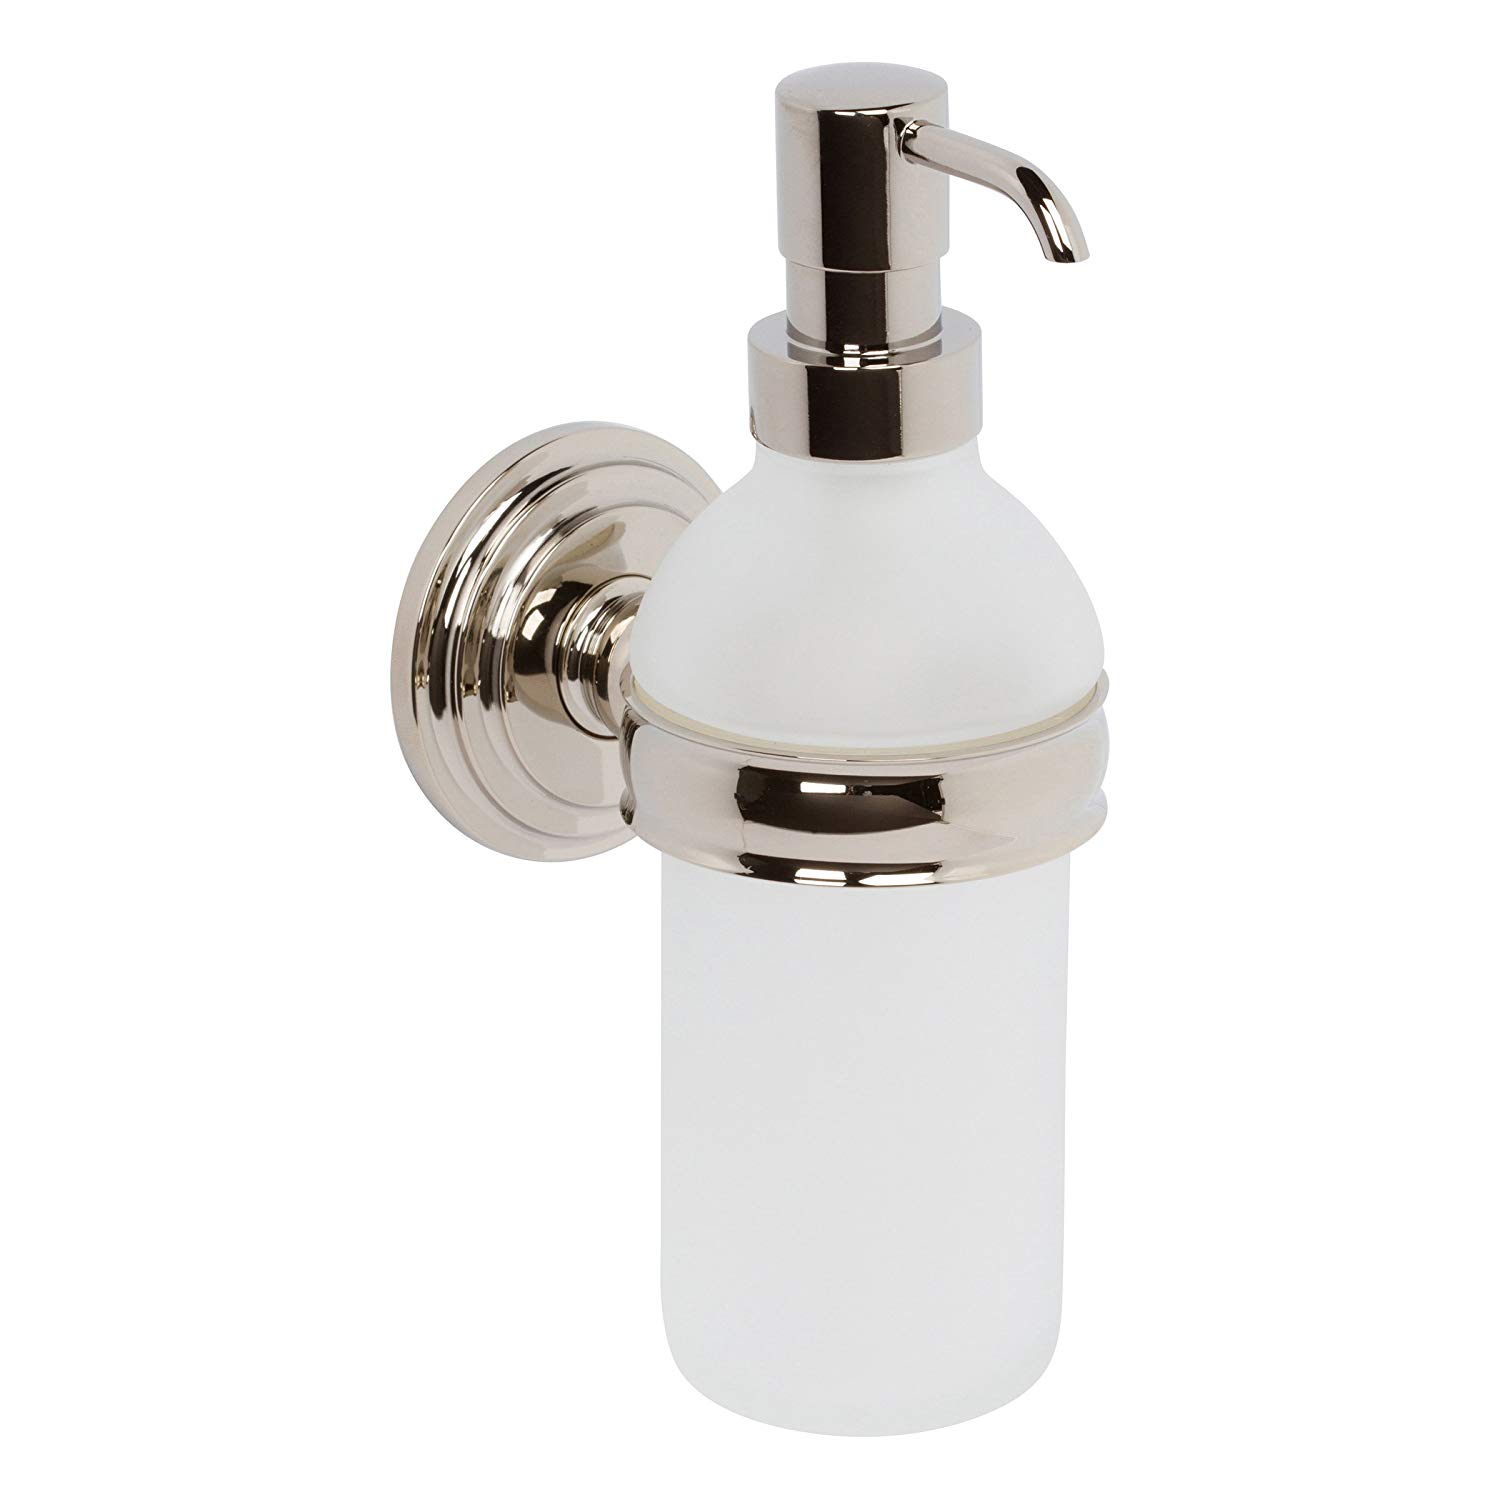 Chelsea Soap/Lotion Dispenser in Polished Nickel